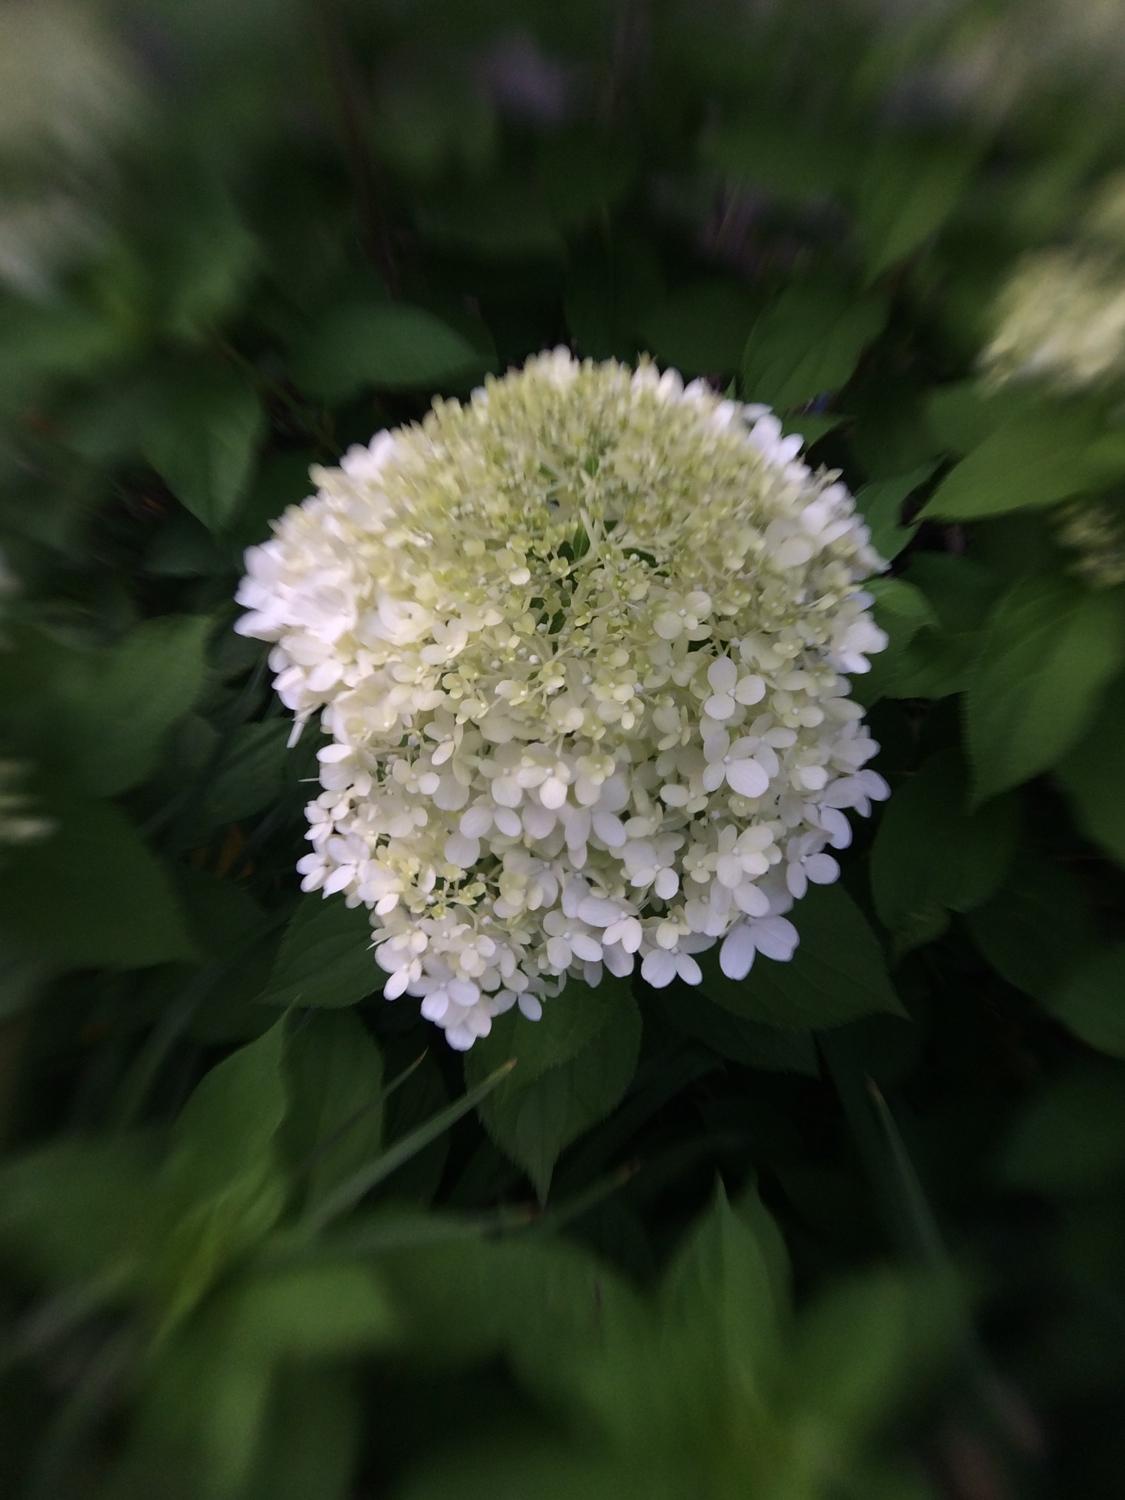 blurs arent defects but the charm in lensbabys new mobile lens kit lensbaby creative sample 8